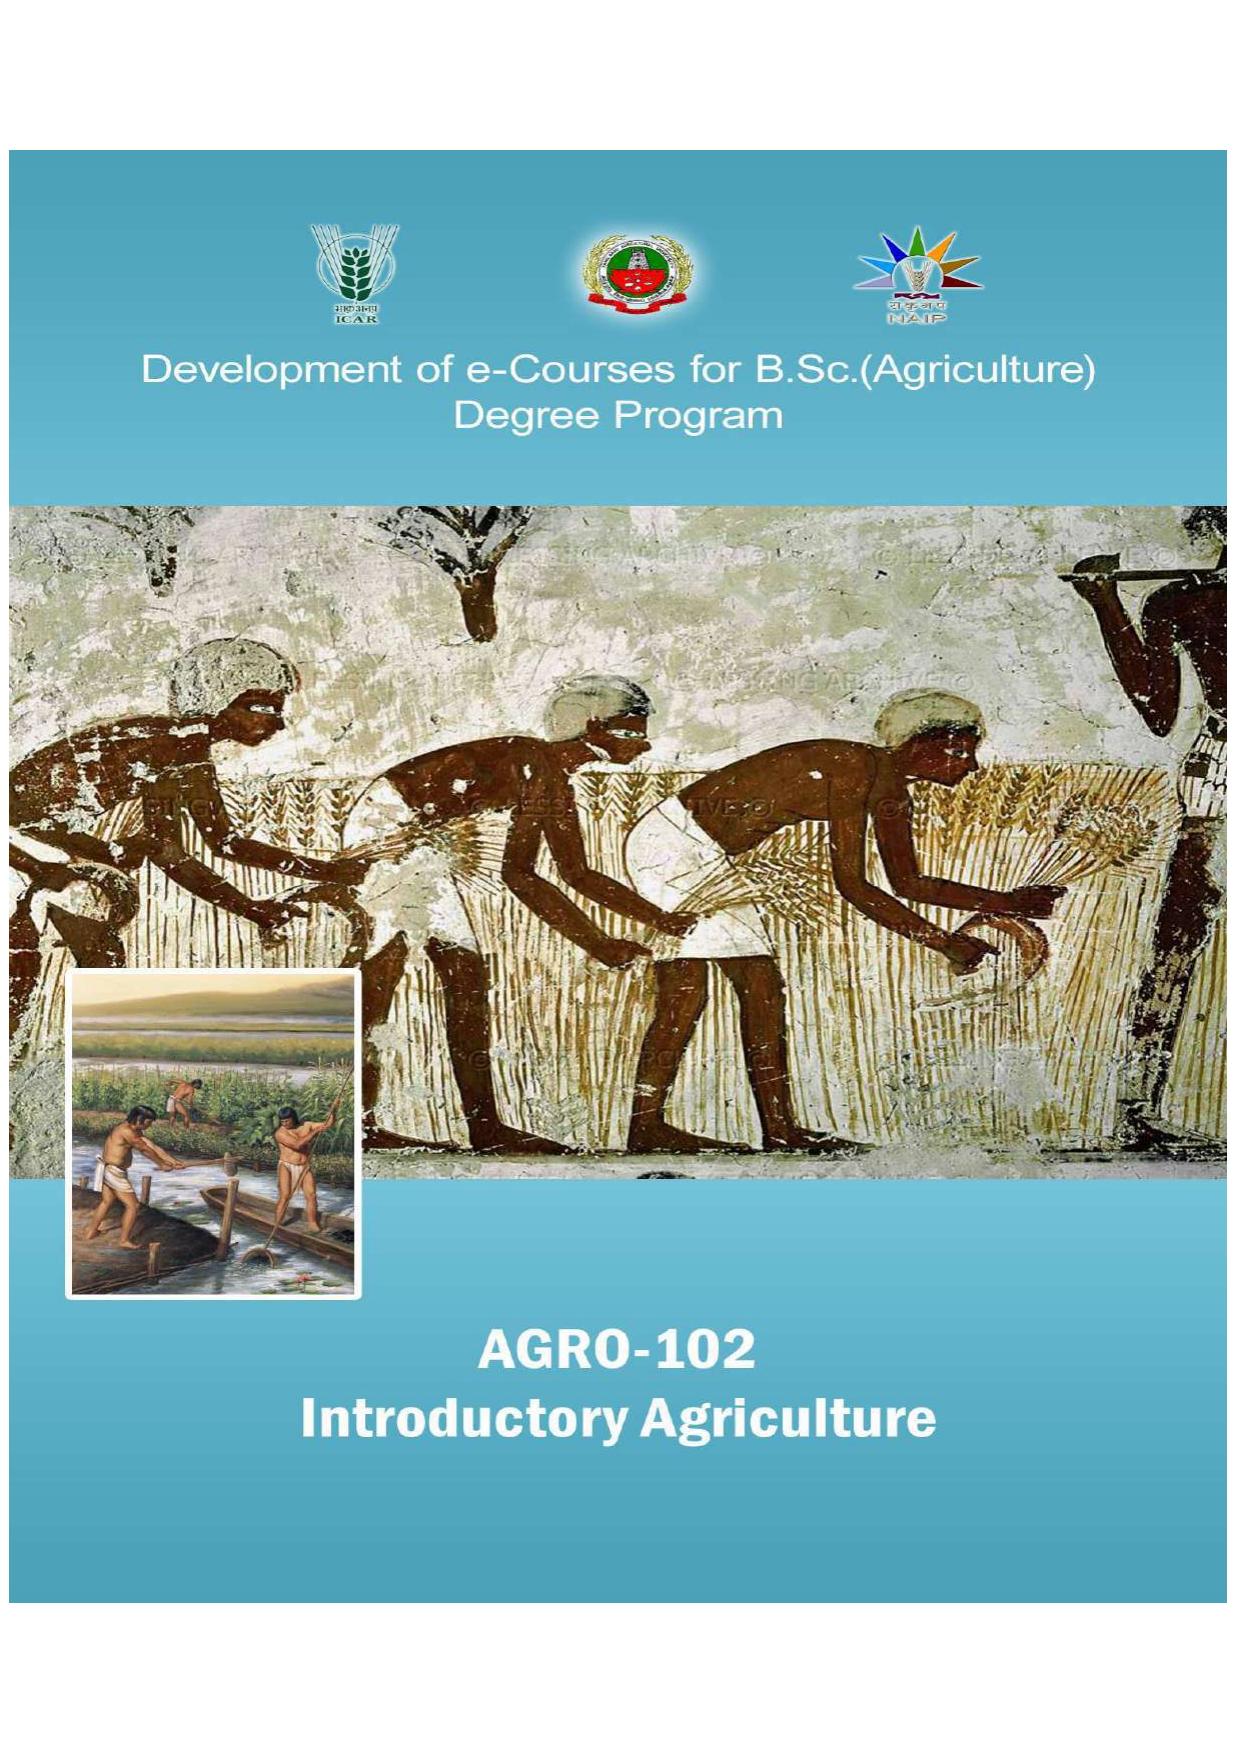 INTRODUCTORY AGRICULTURE